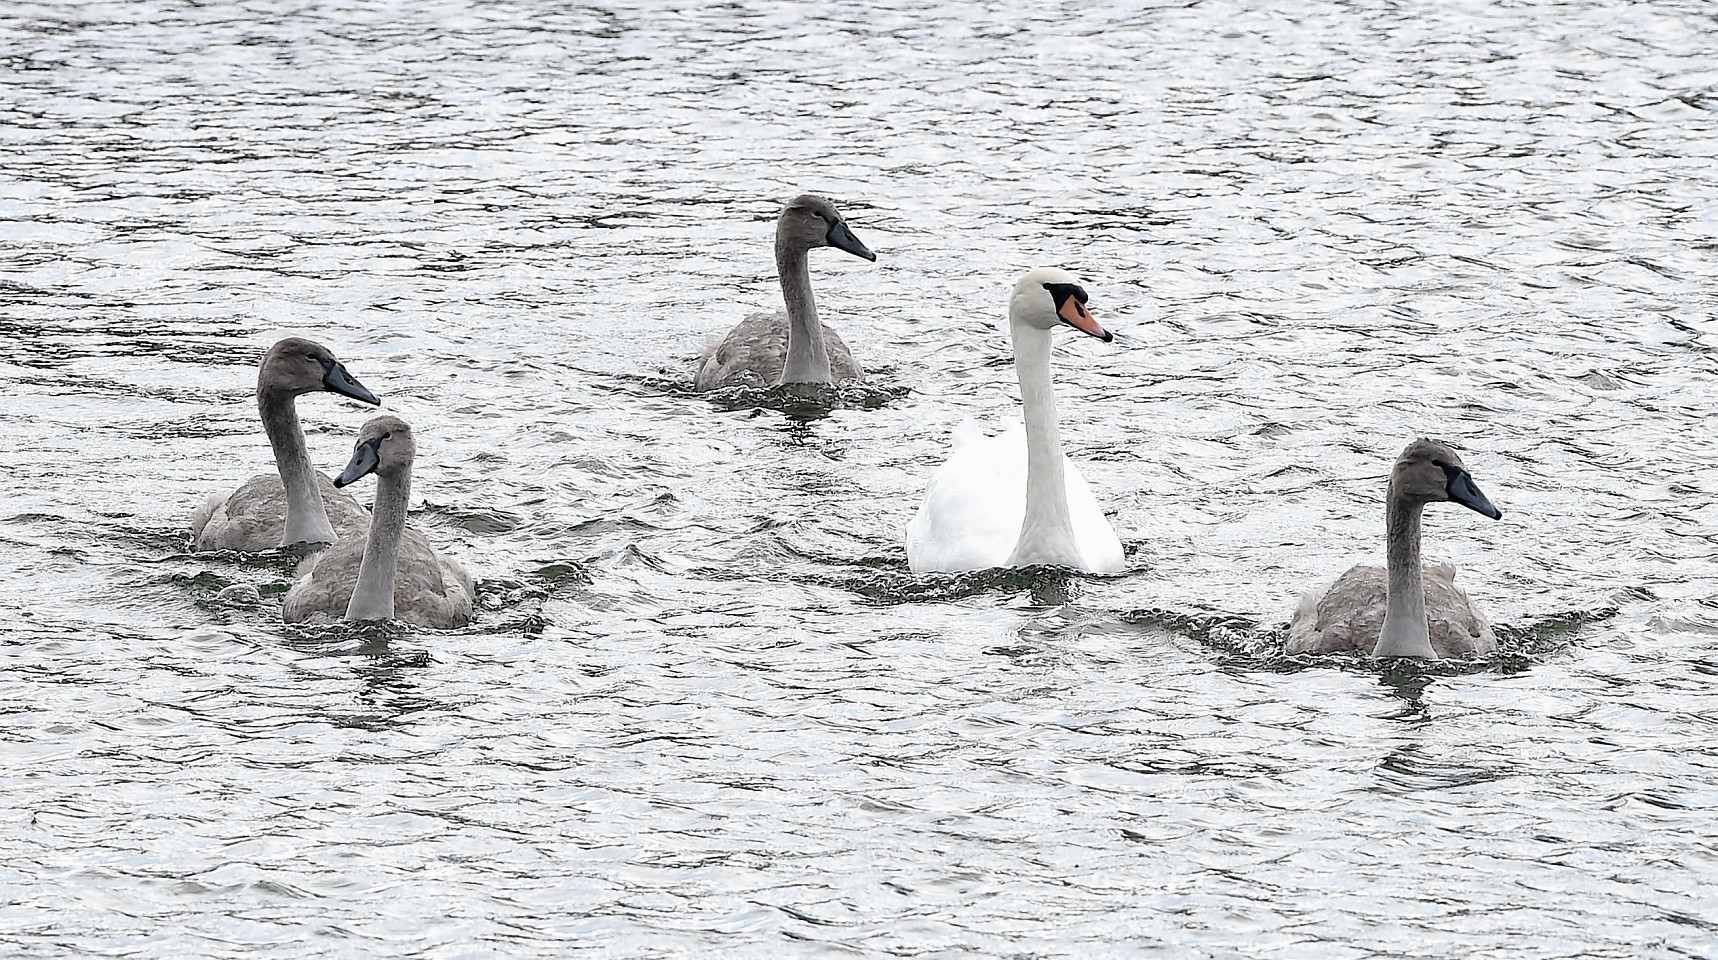 Swans with their signets on the loch at the Inverness Campus yesterday afternoon.